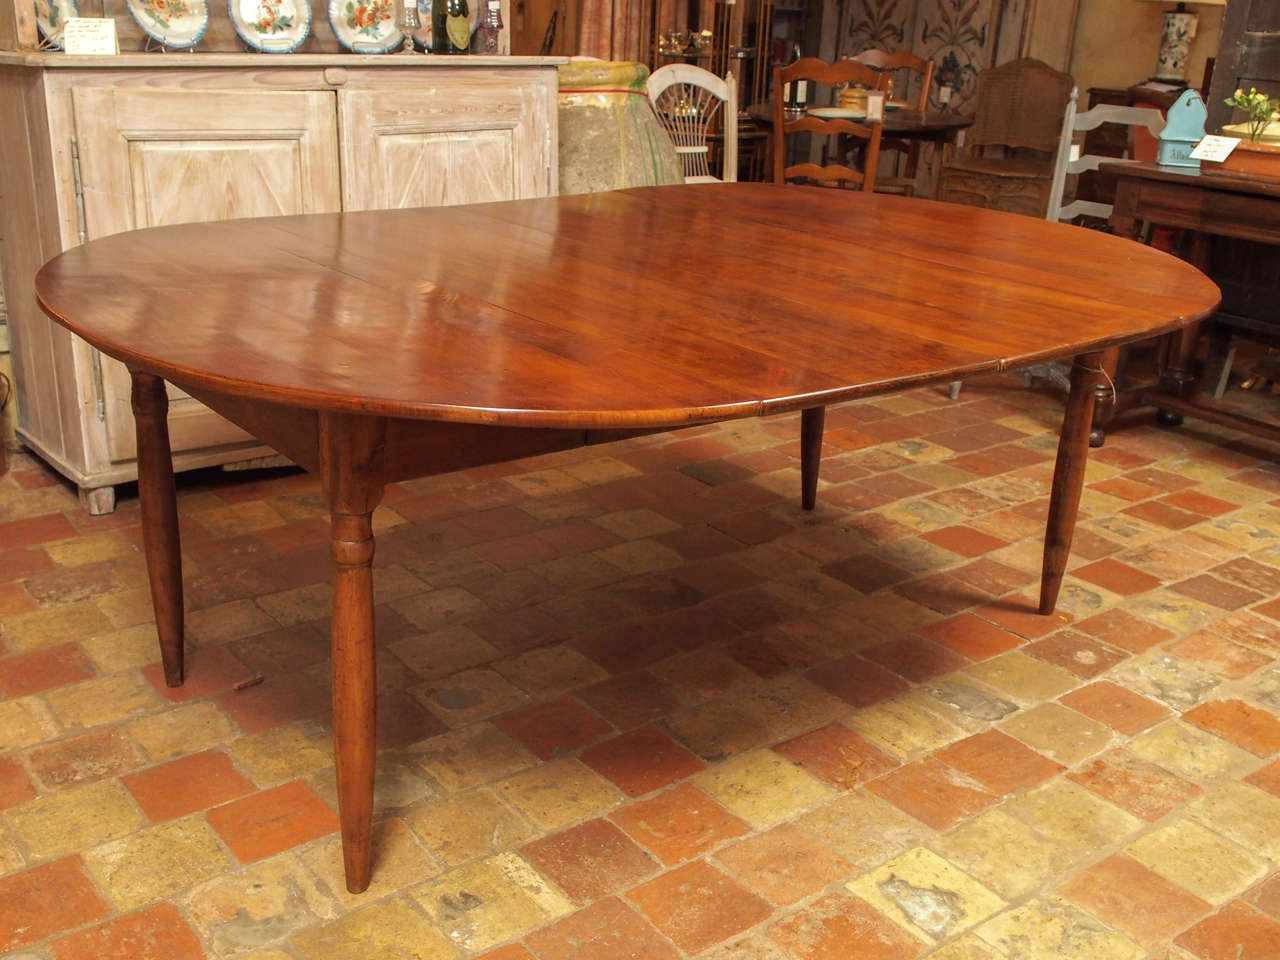 19th c. French Oval Dining Table with Two Leaves.